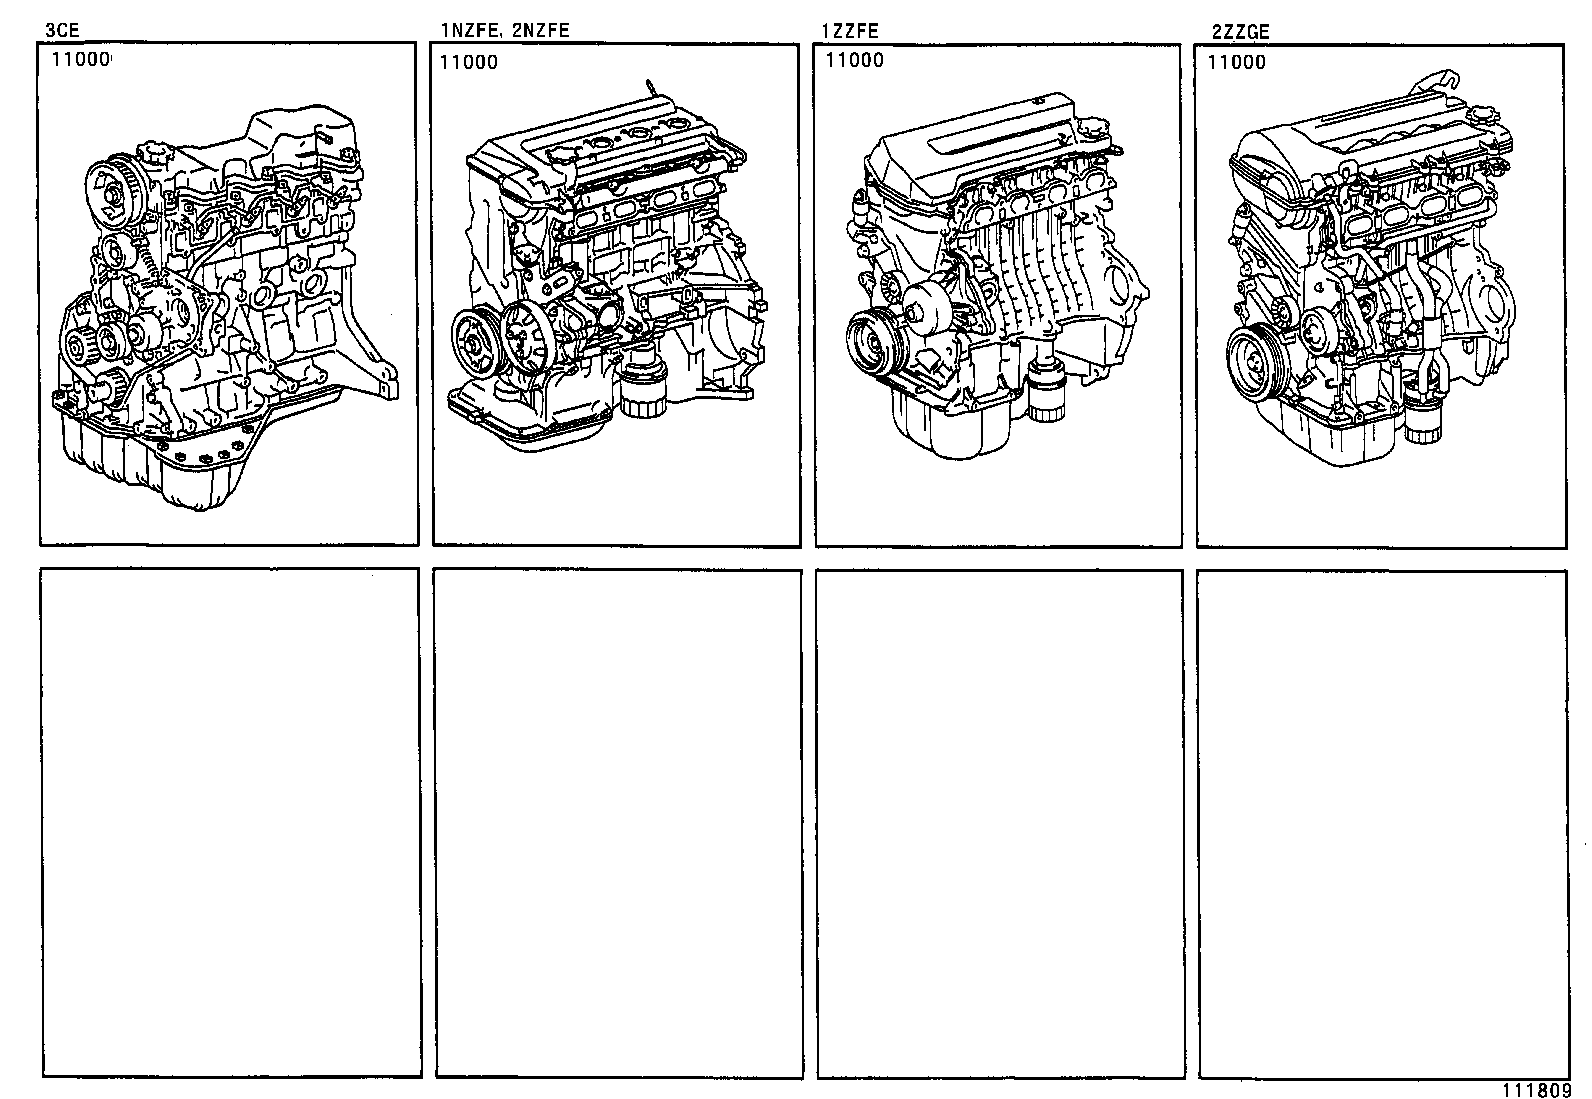  COROLLA FIELDER |  PARTIAL ENGINE ASSEMBLY